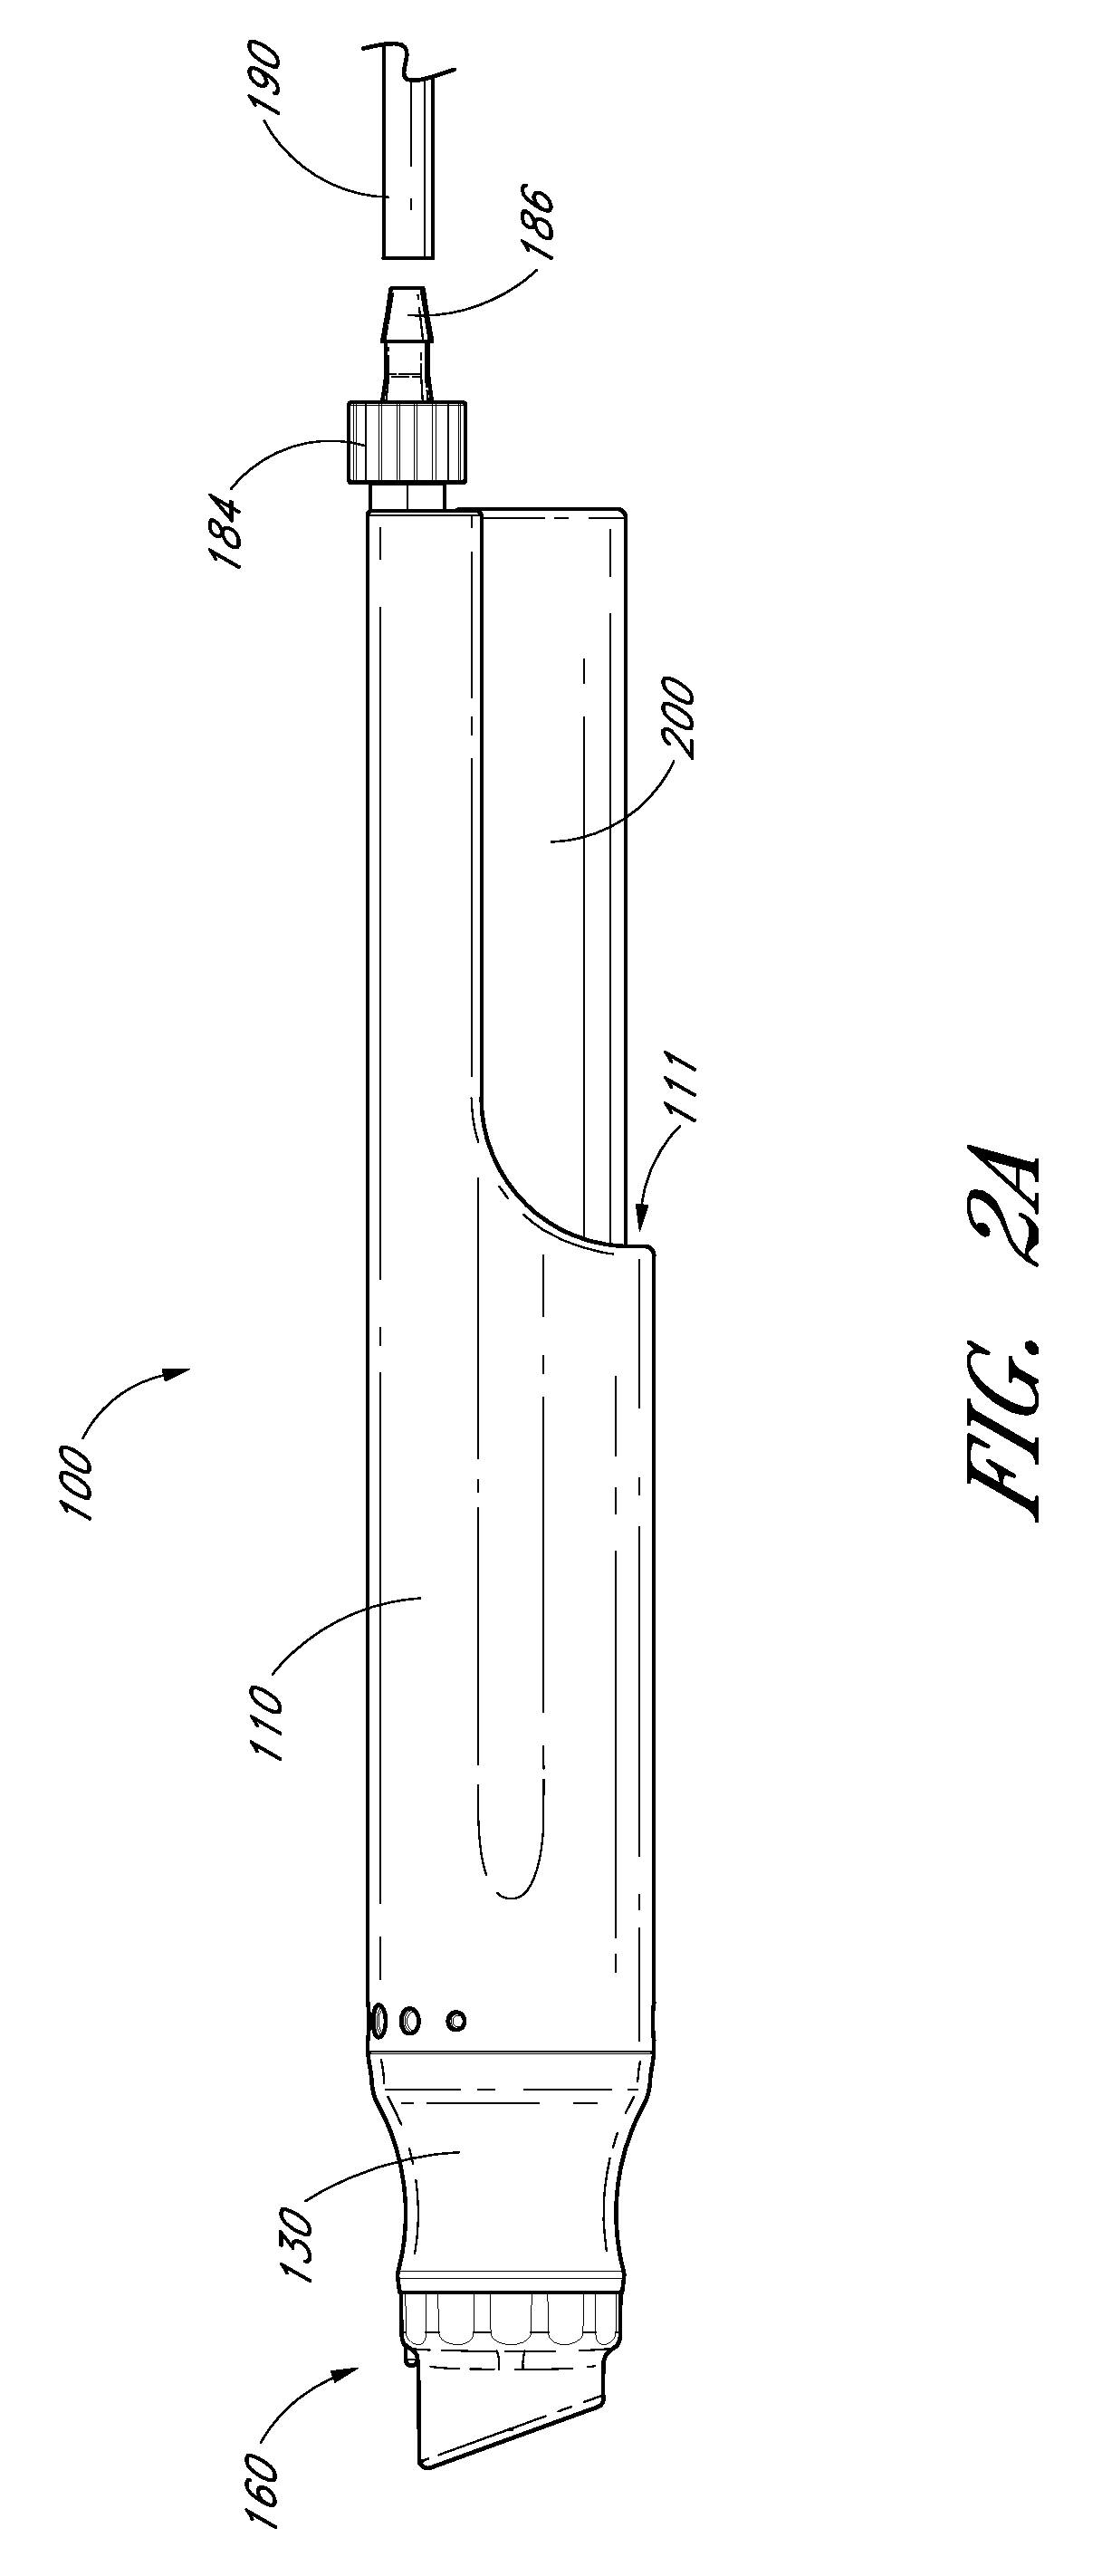 Devices, systems and methods for treating the skin using time-release substances